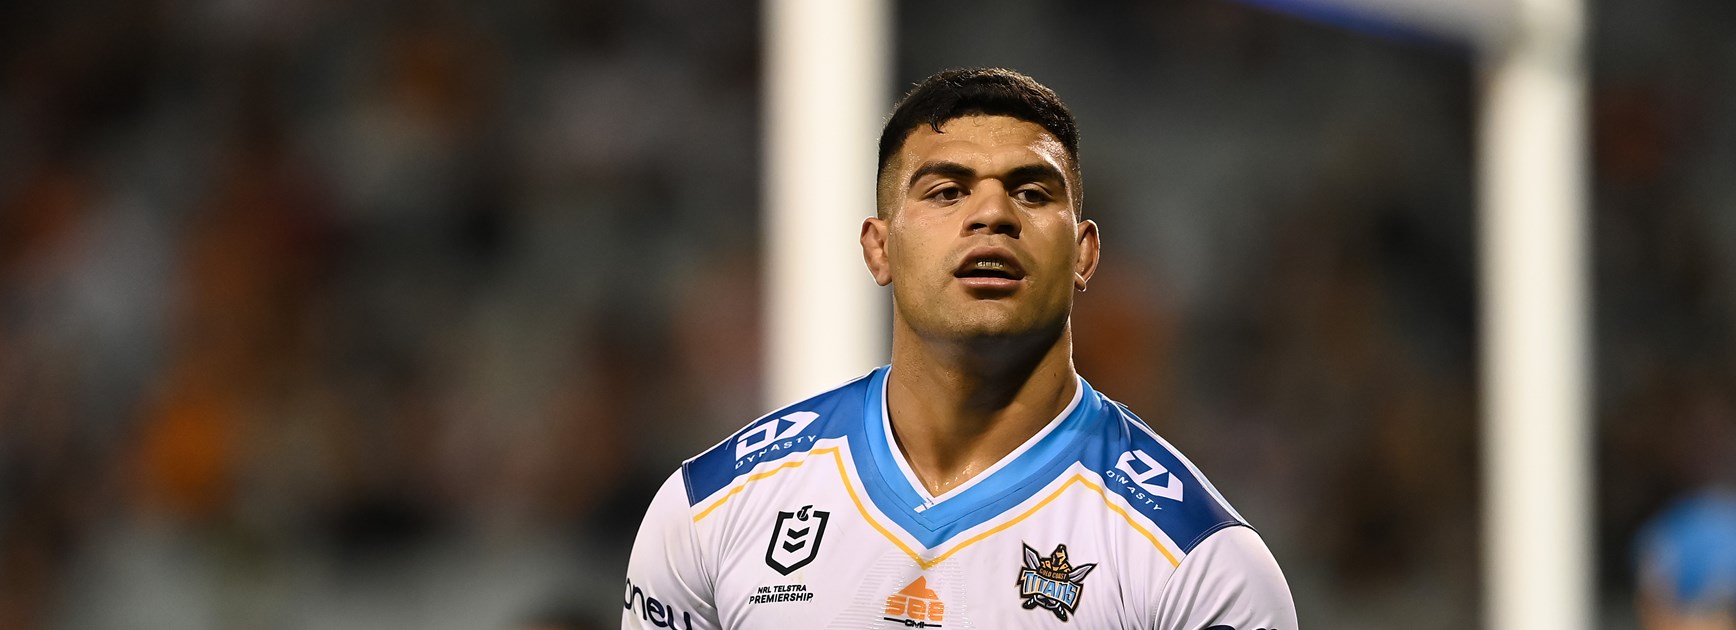 Fifita to contest charge grading at judiciary